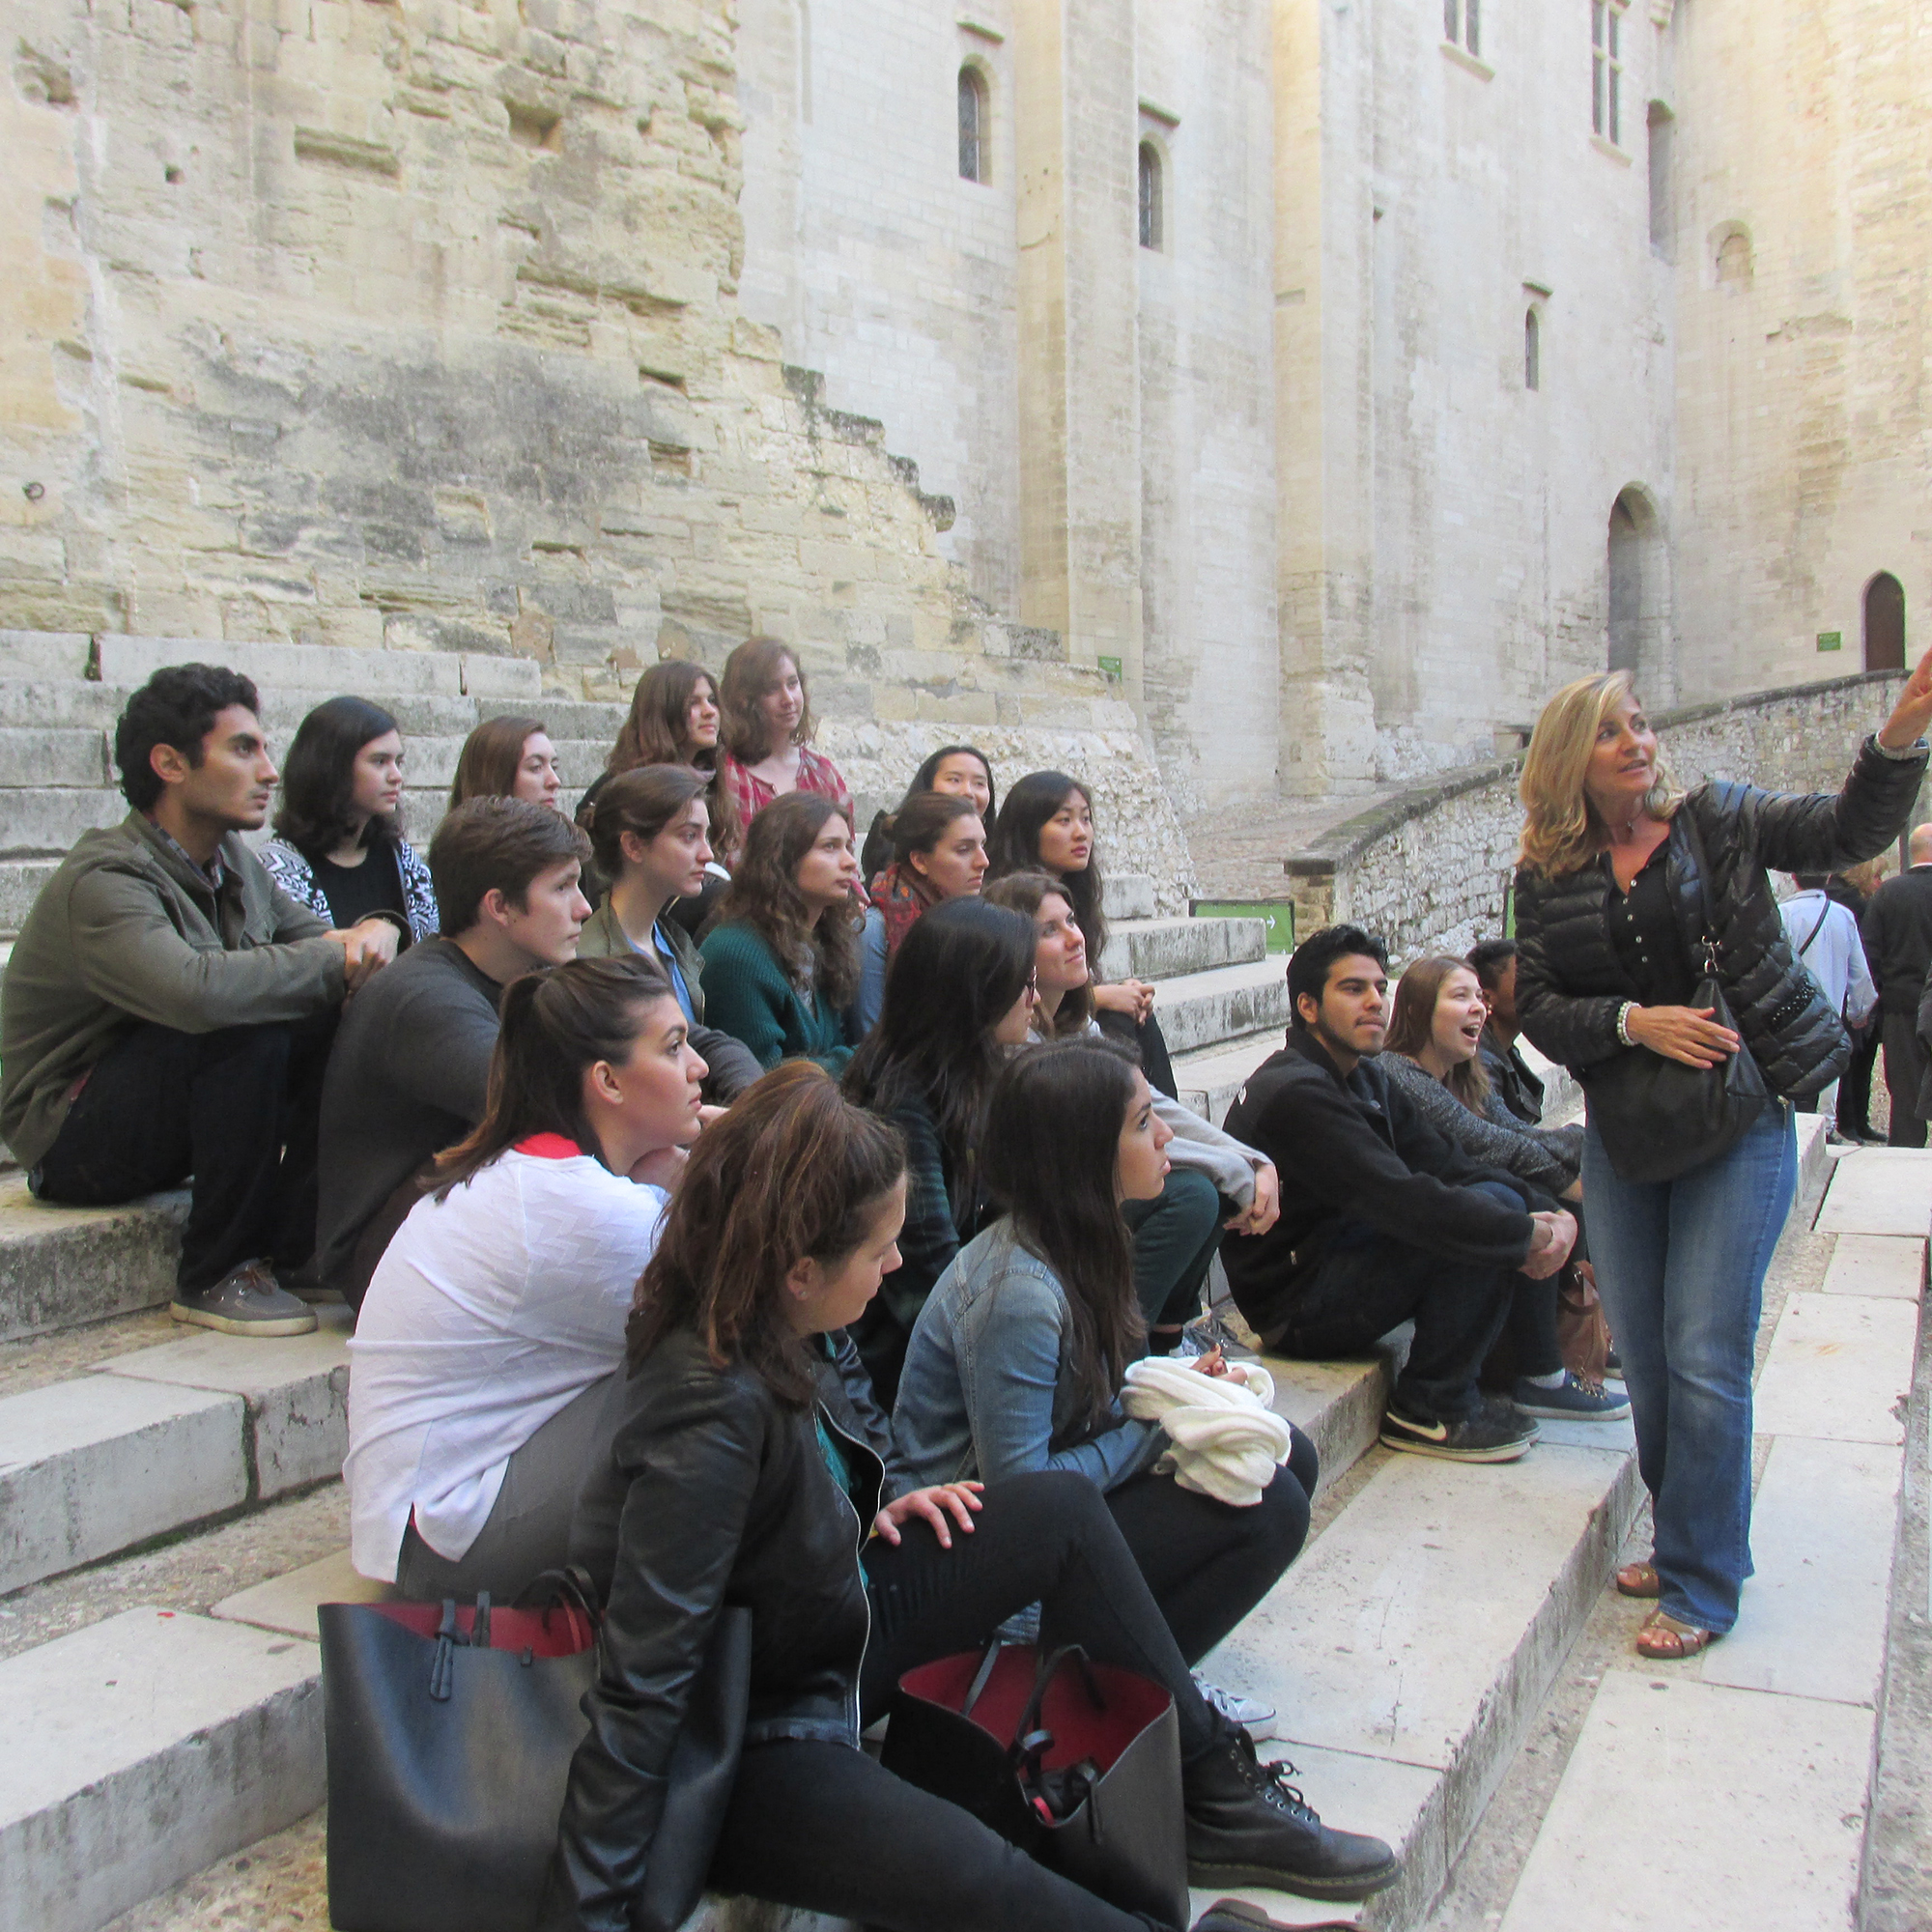 The Hamilton in France program group listens to a guide at the Palais.